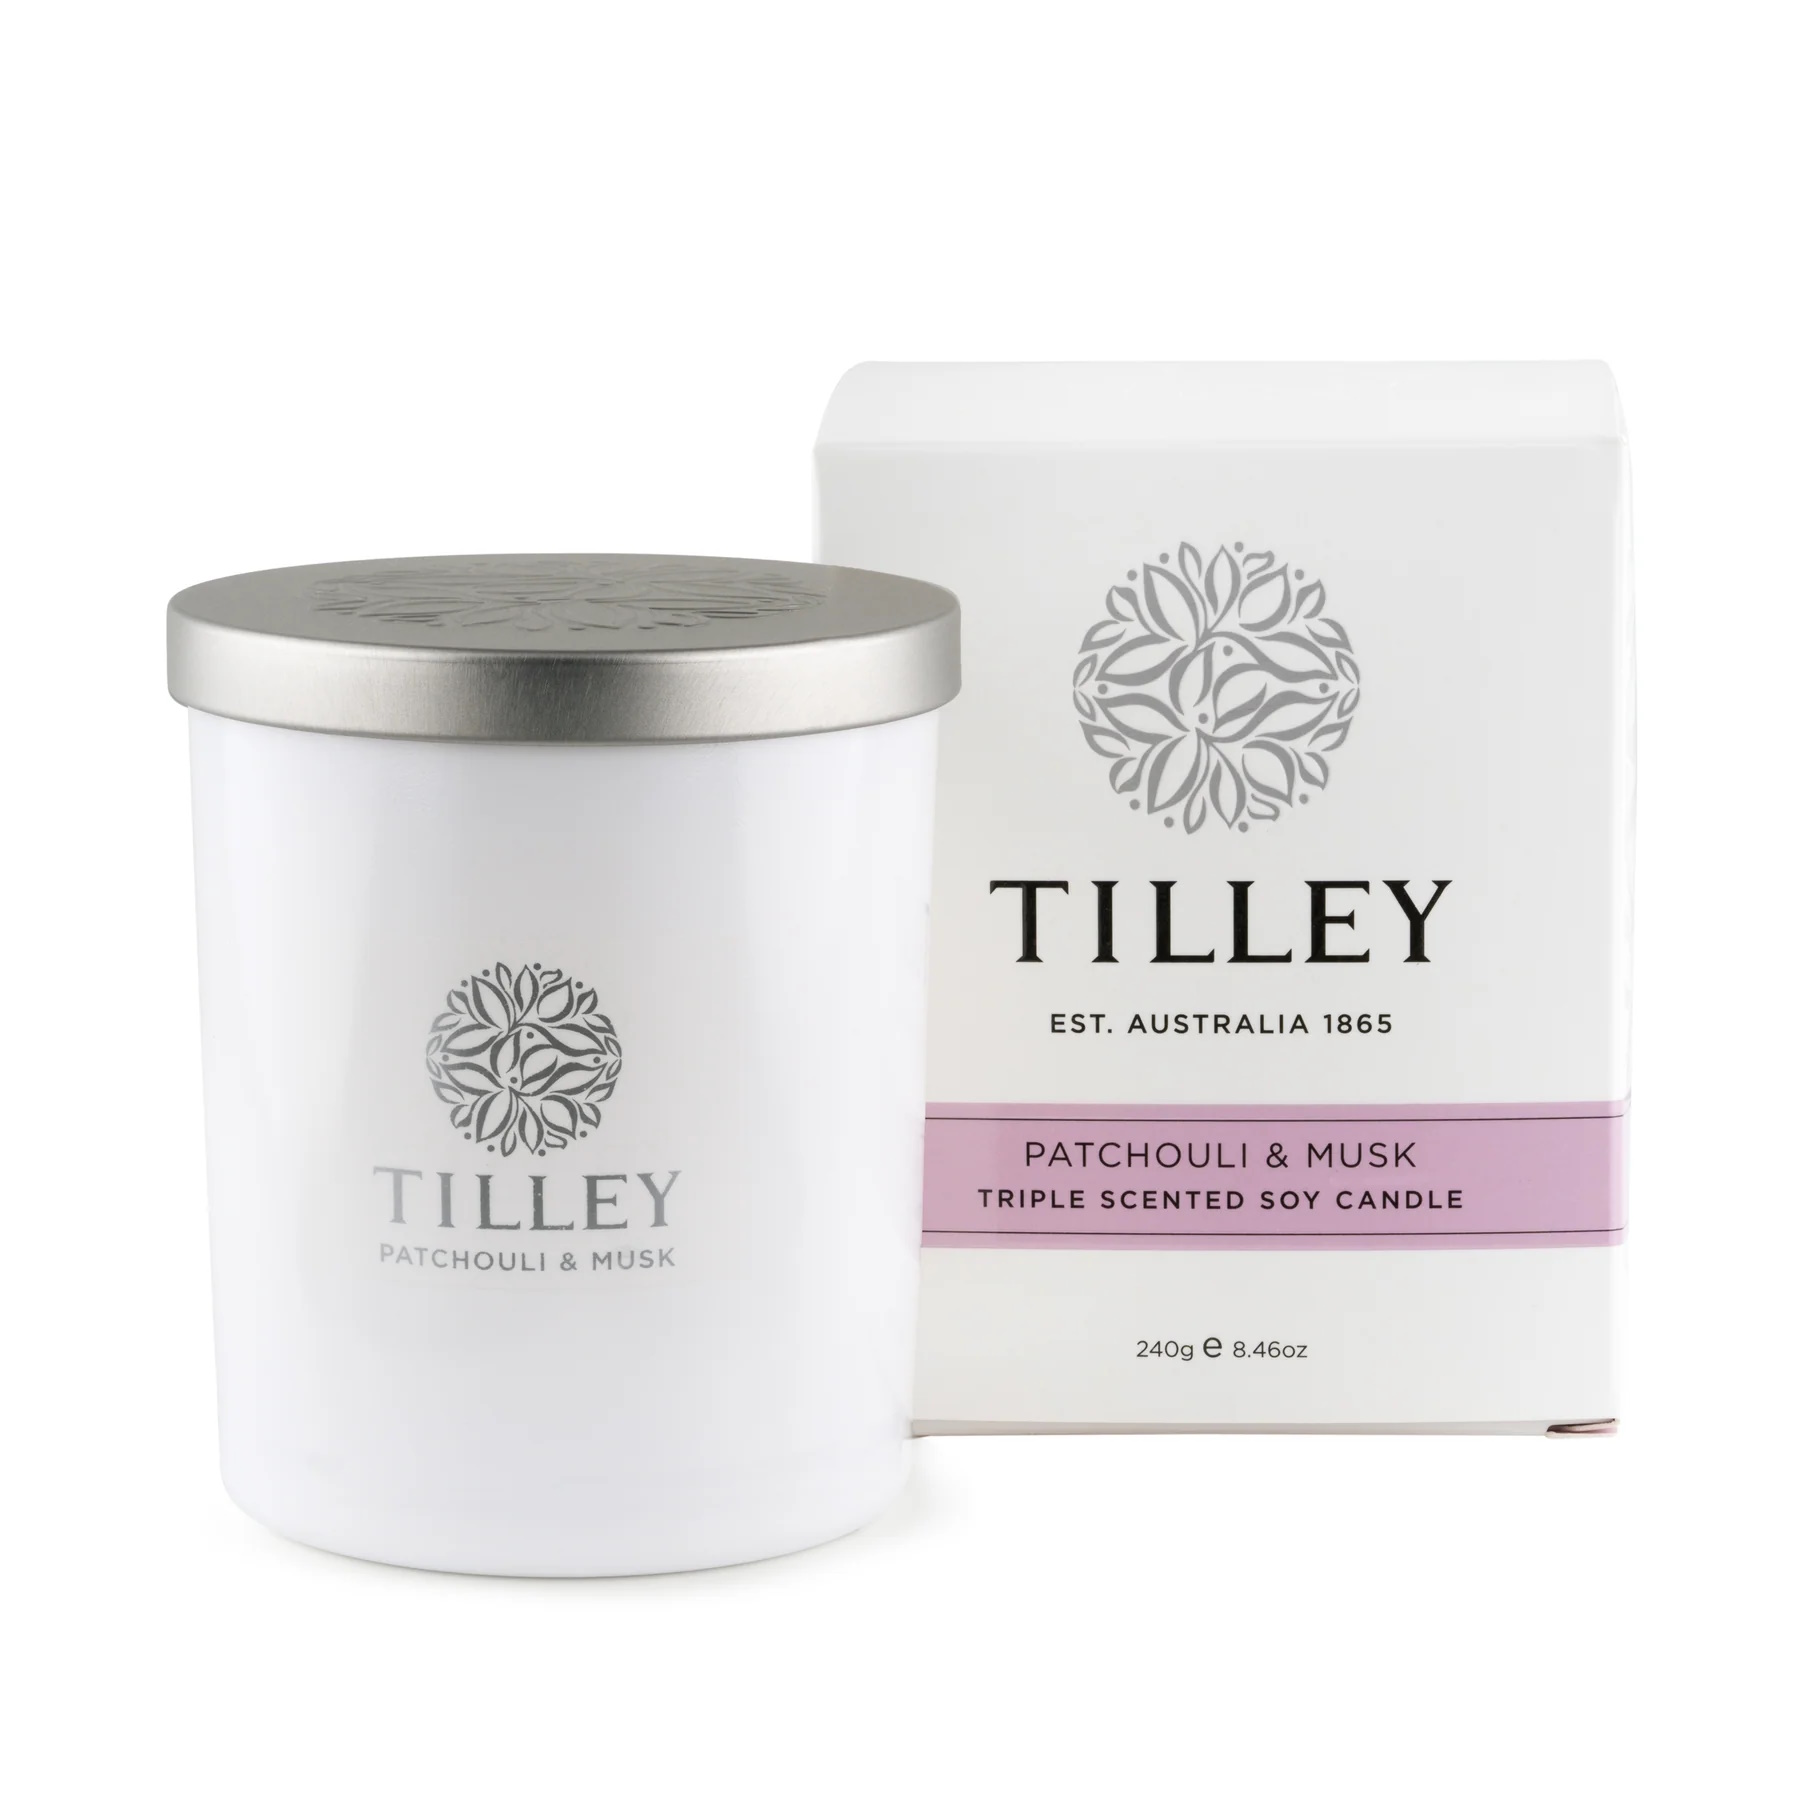 Tilley Classic White Patchouli & Musk Soy Candle 240g